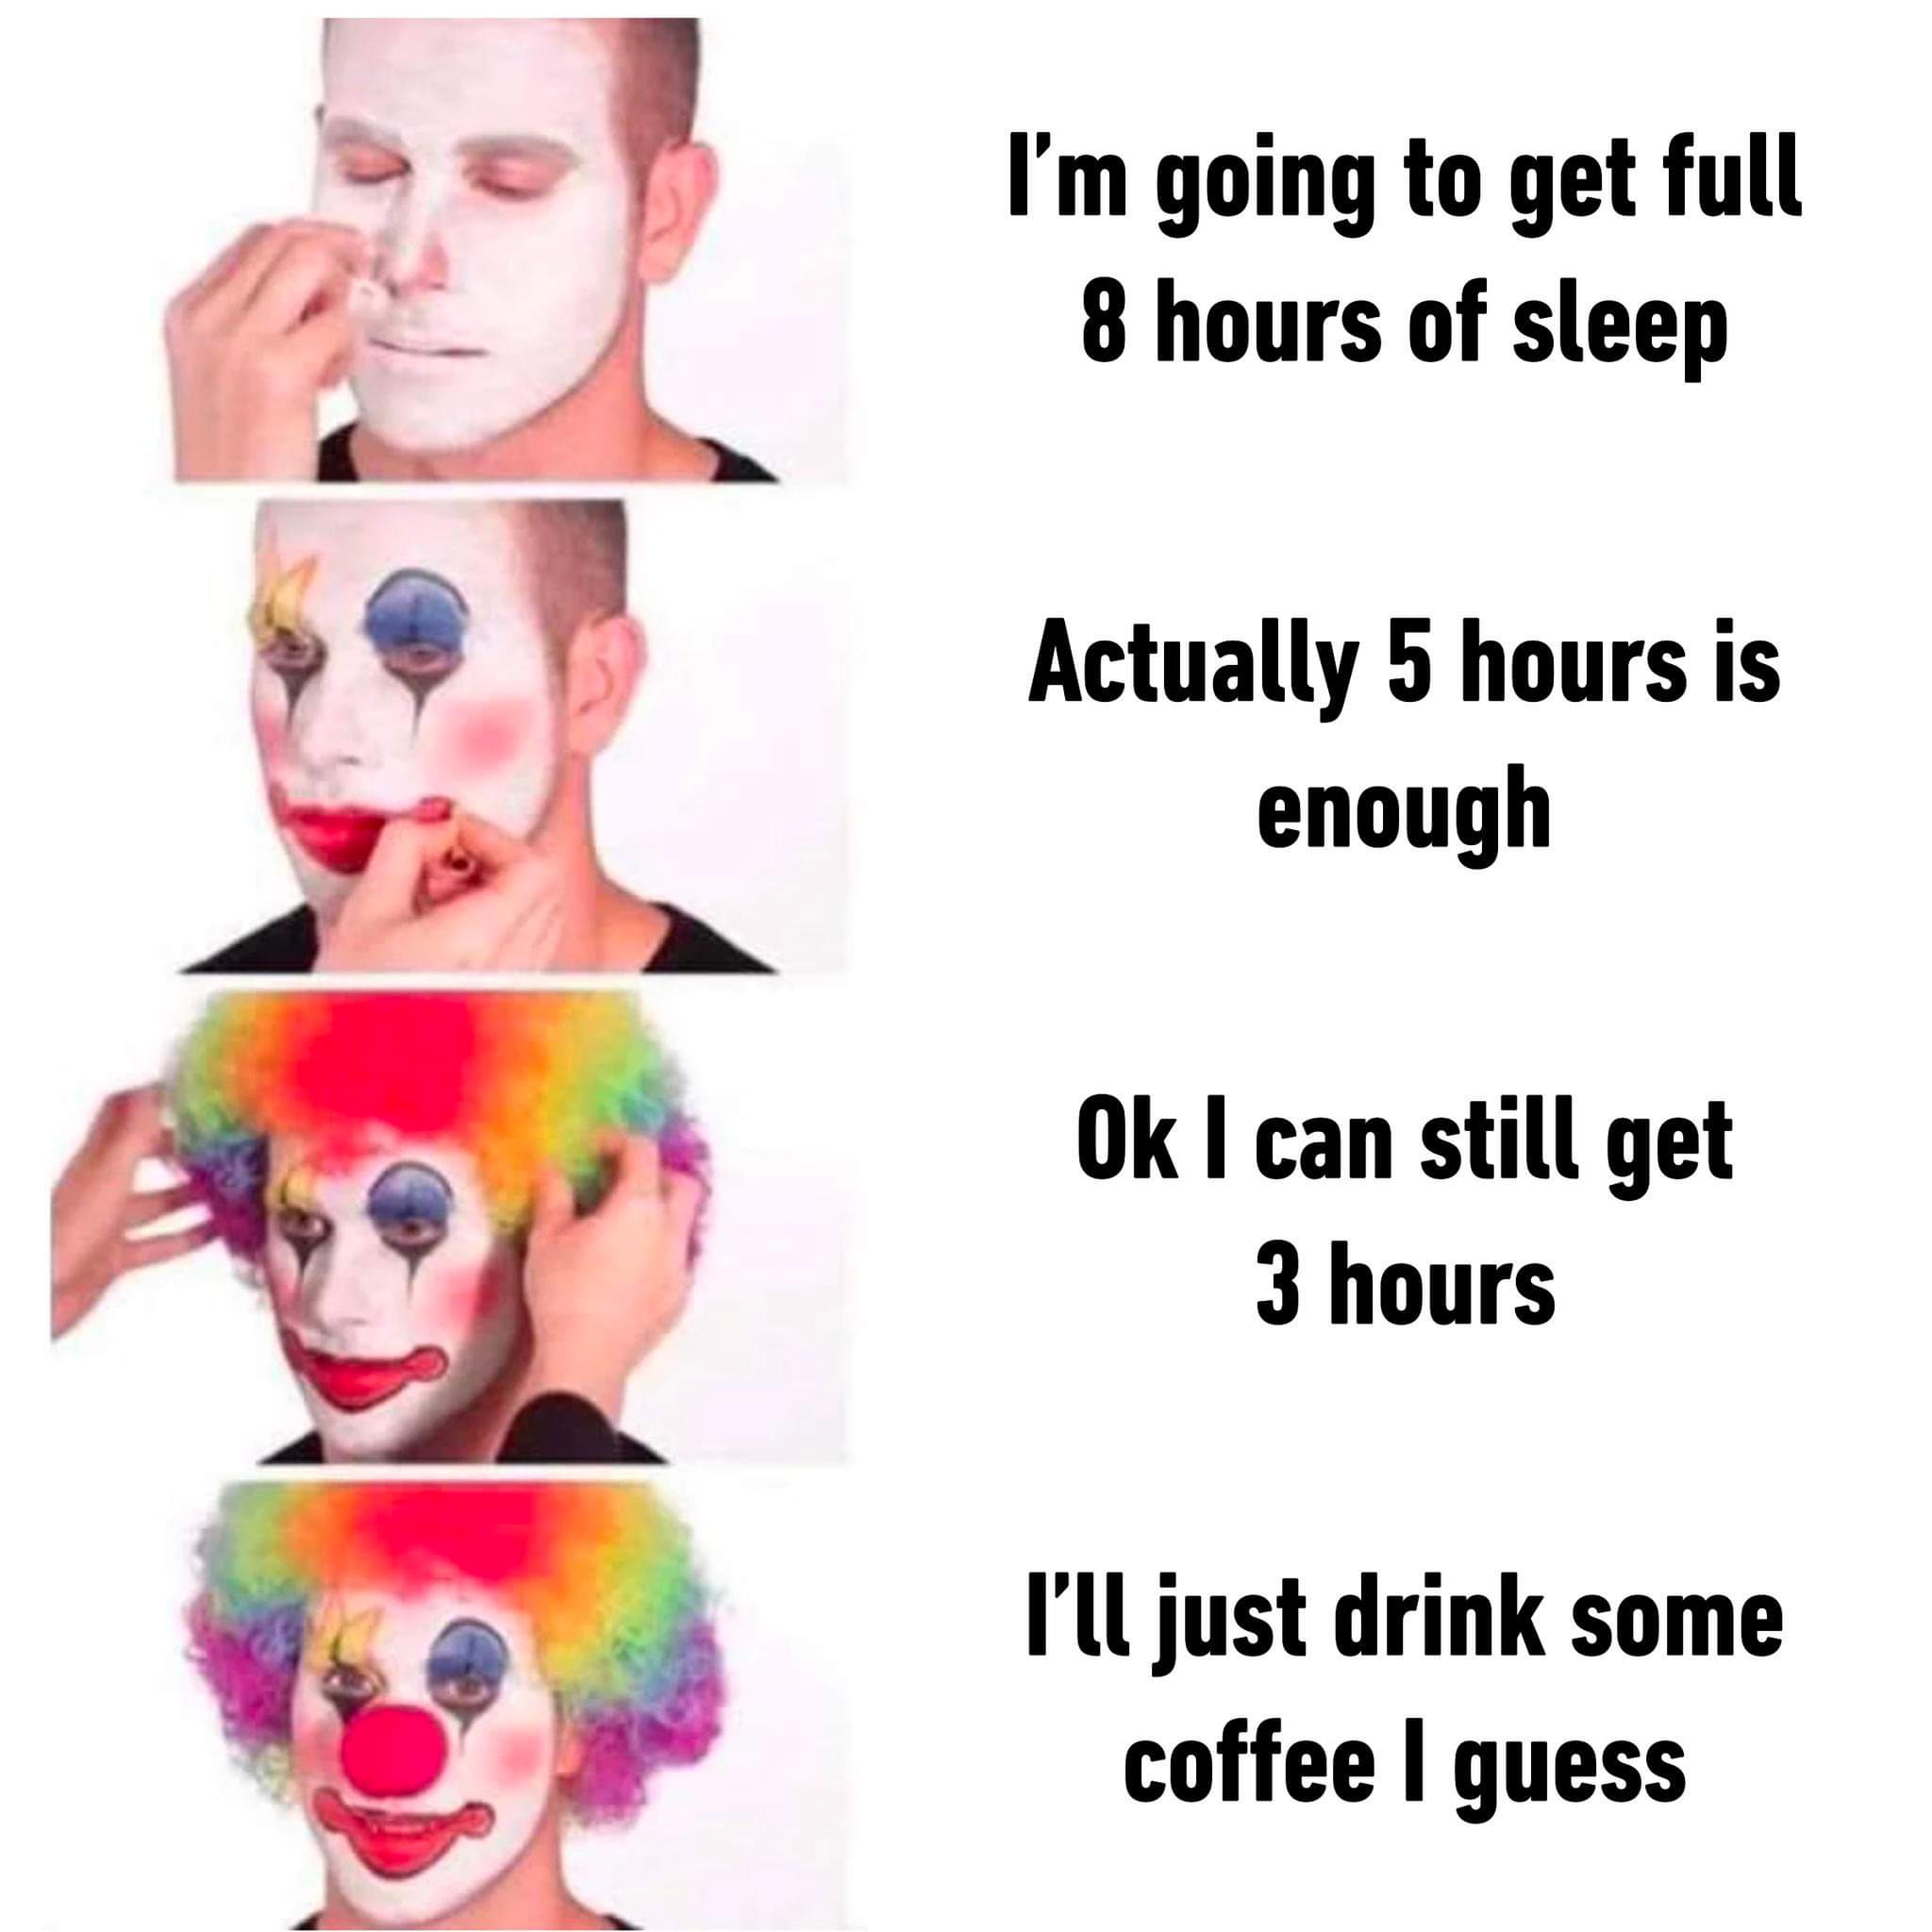 dank memes - funny memes - clown meme stocks - I'm going to get full 8 hours of sleep Actually 5 hours is enough Ok I can still get 3 hours I'll just drink some coffee I guess